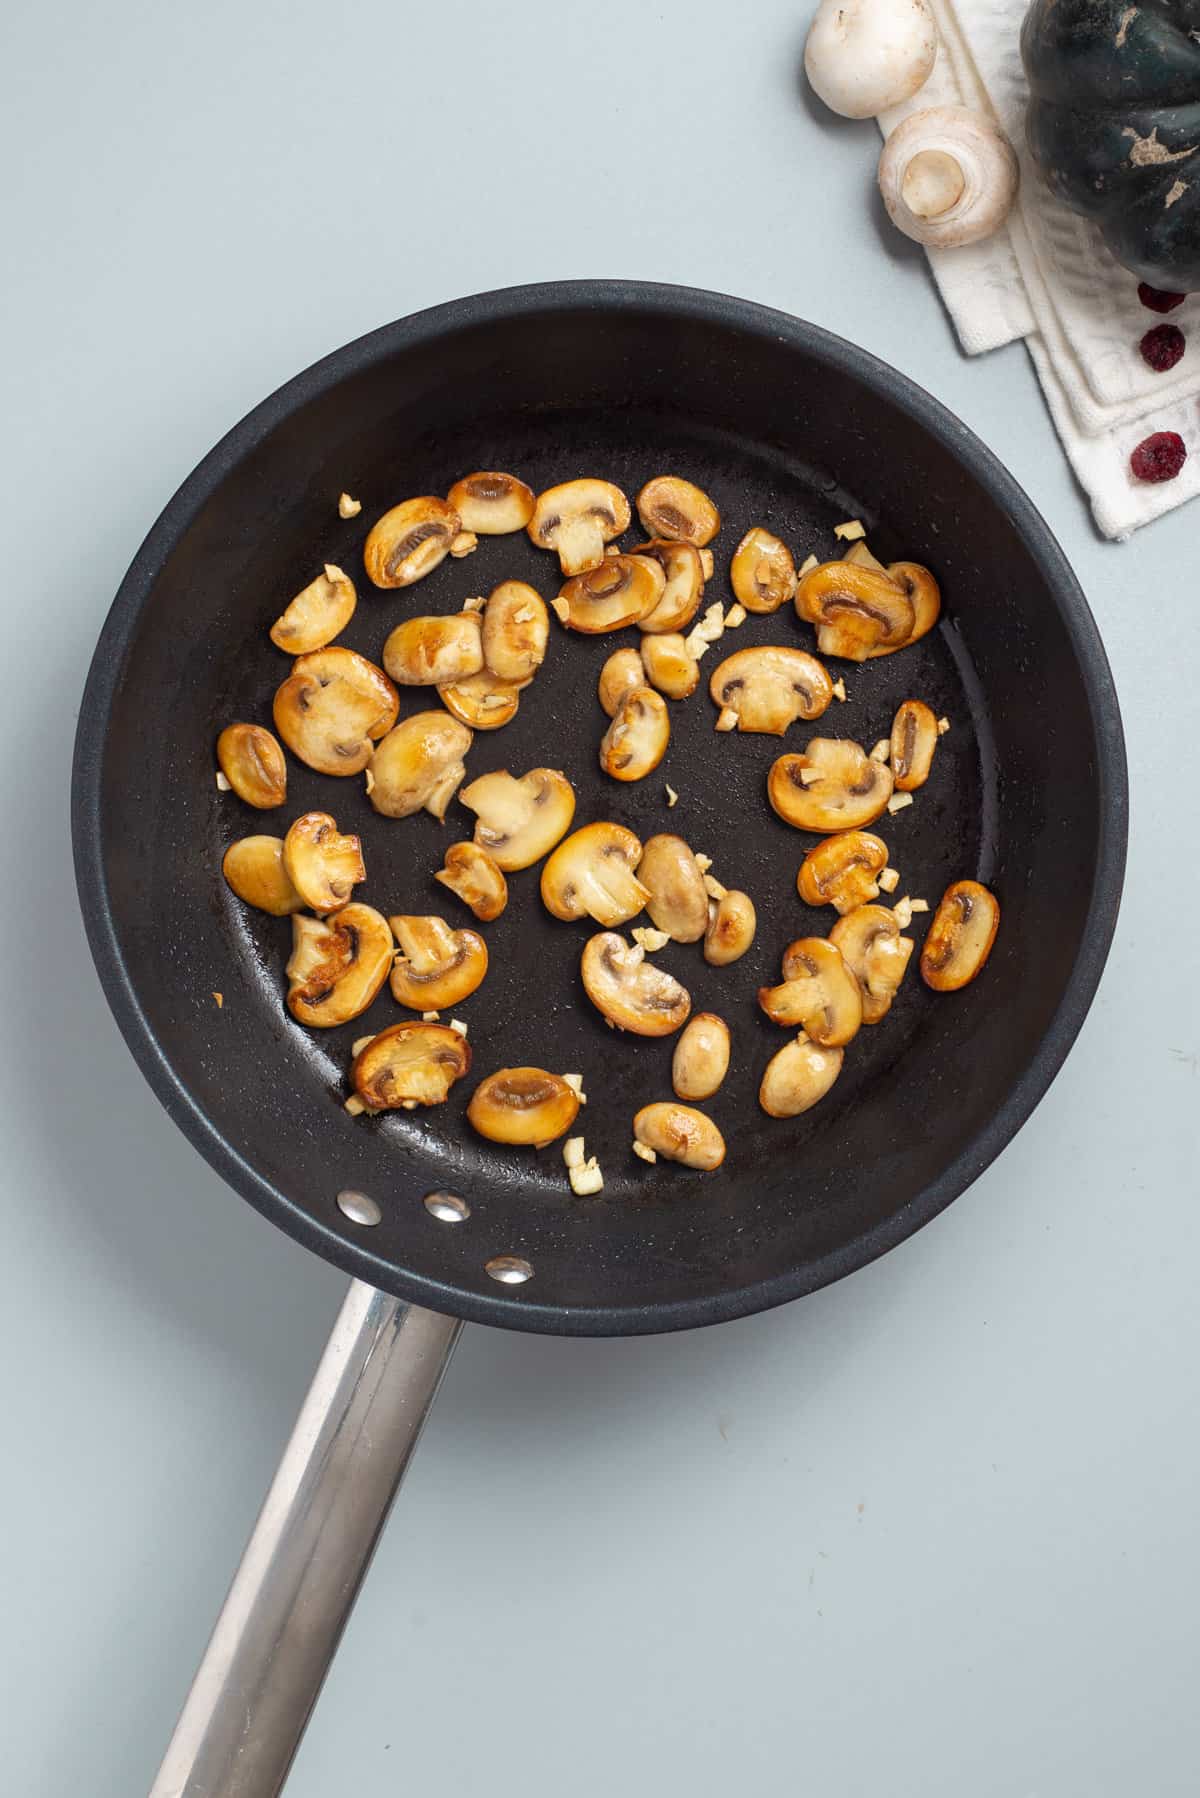 Overhead view of skillet with mushrooms.